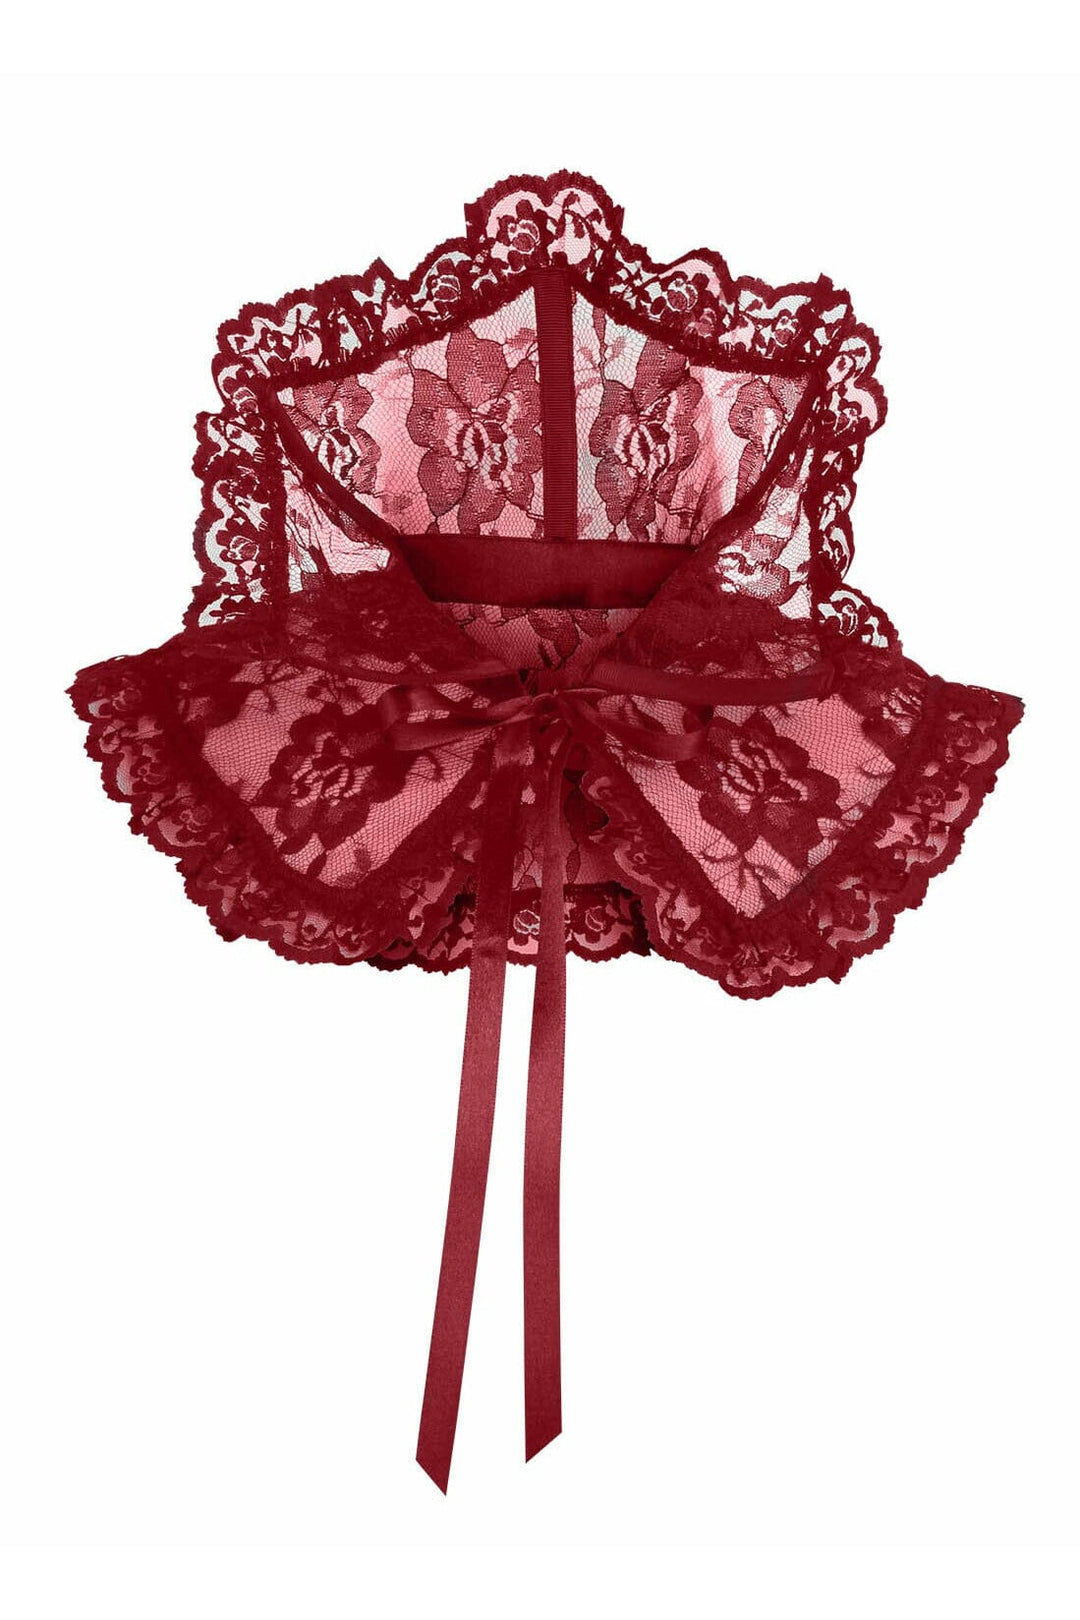 Dark Red Lace Neck Collar-Costume Kits-Daisy Corsets-Red-O/S-SEXYSHOES.COM